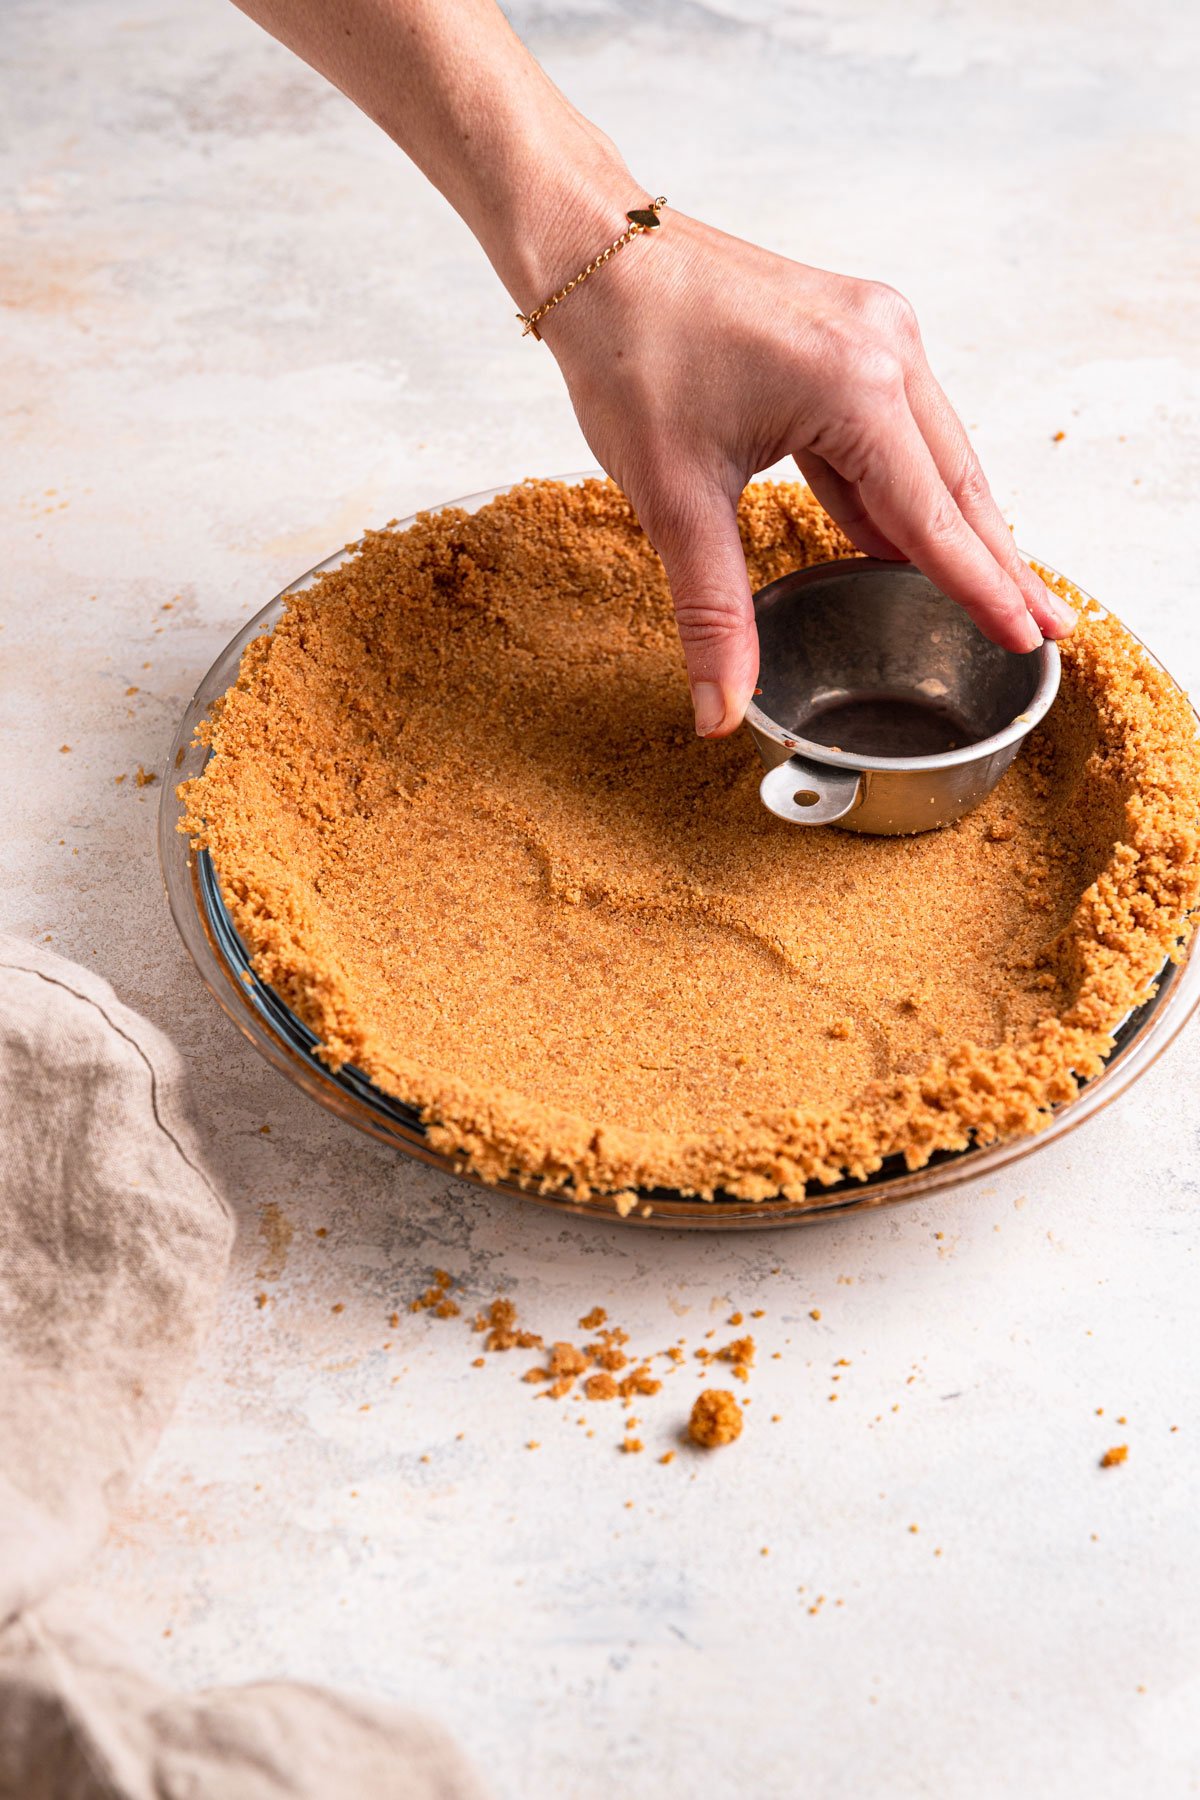 Graham cracker crust being packed into a pie plate using a measuring cup.